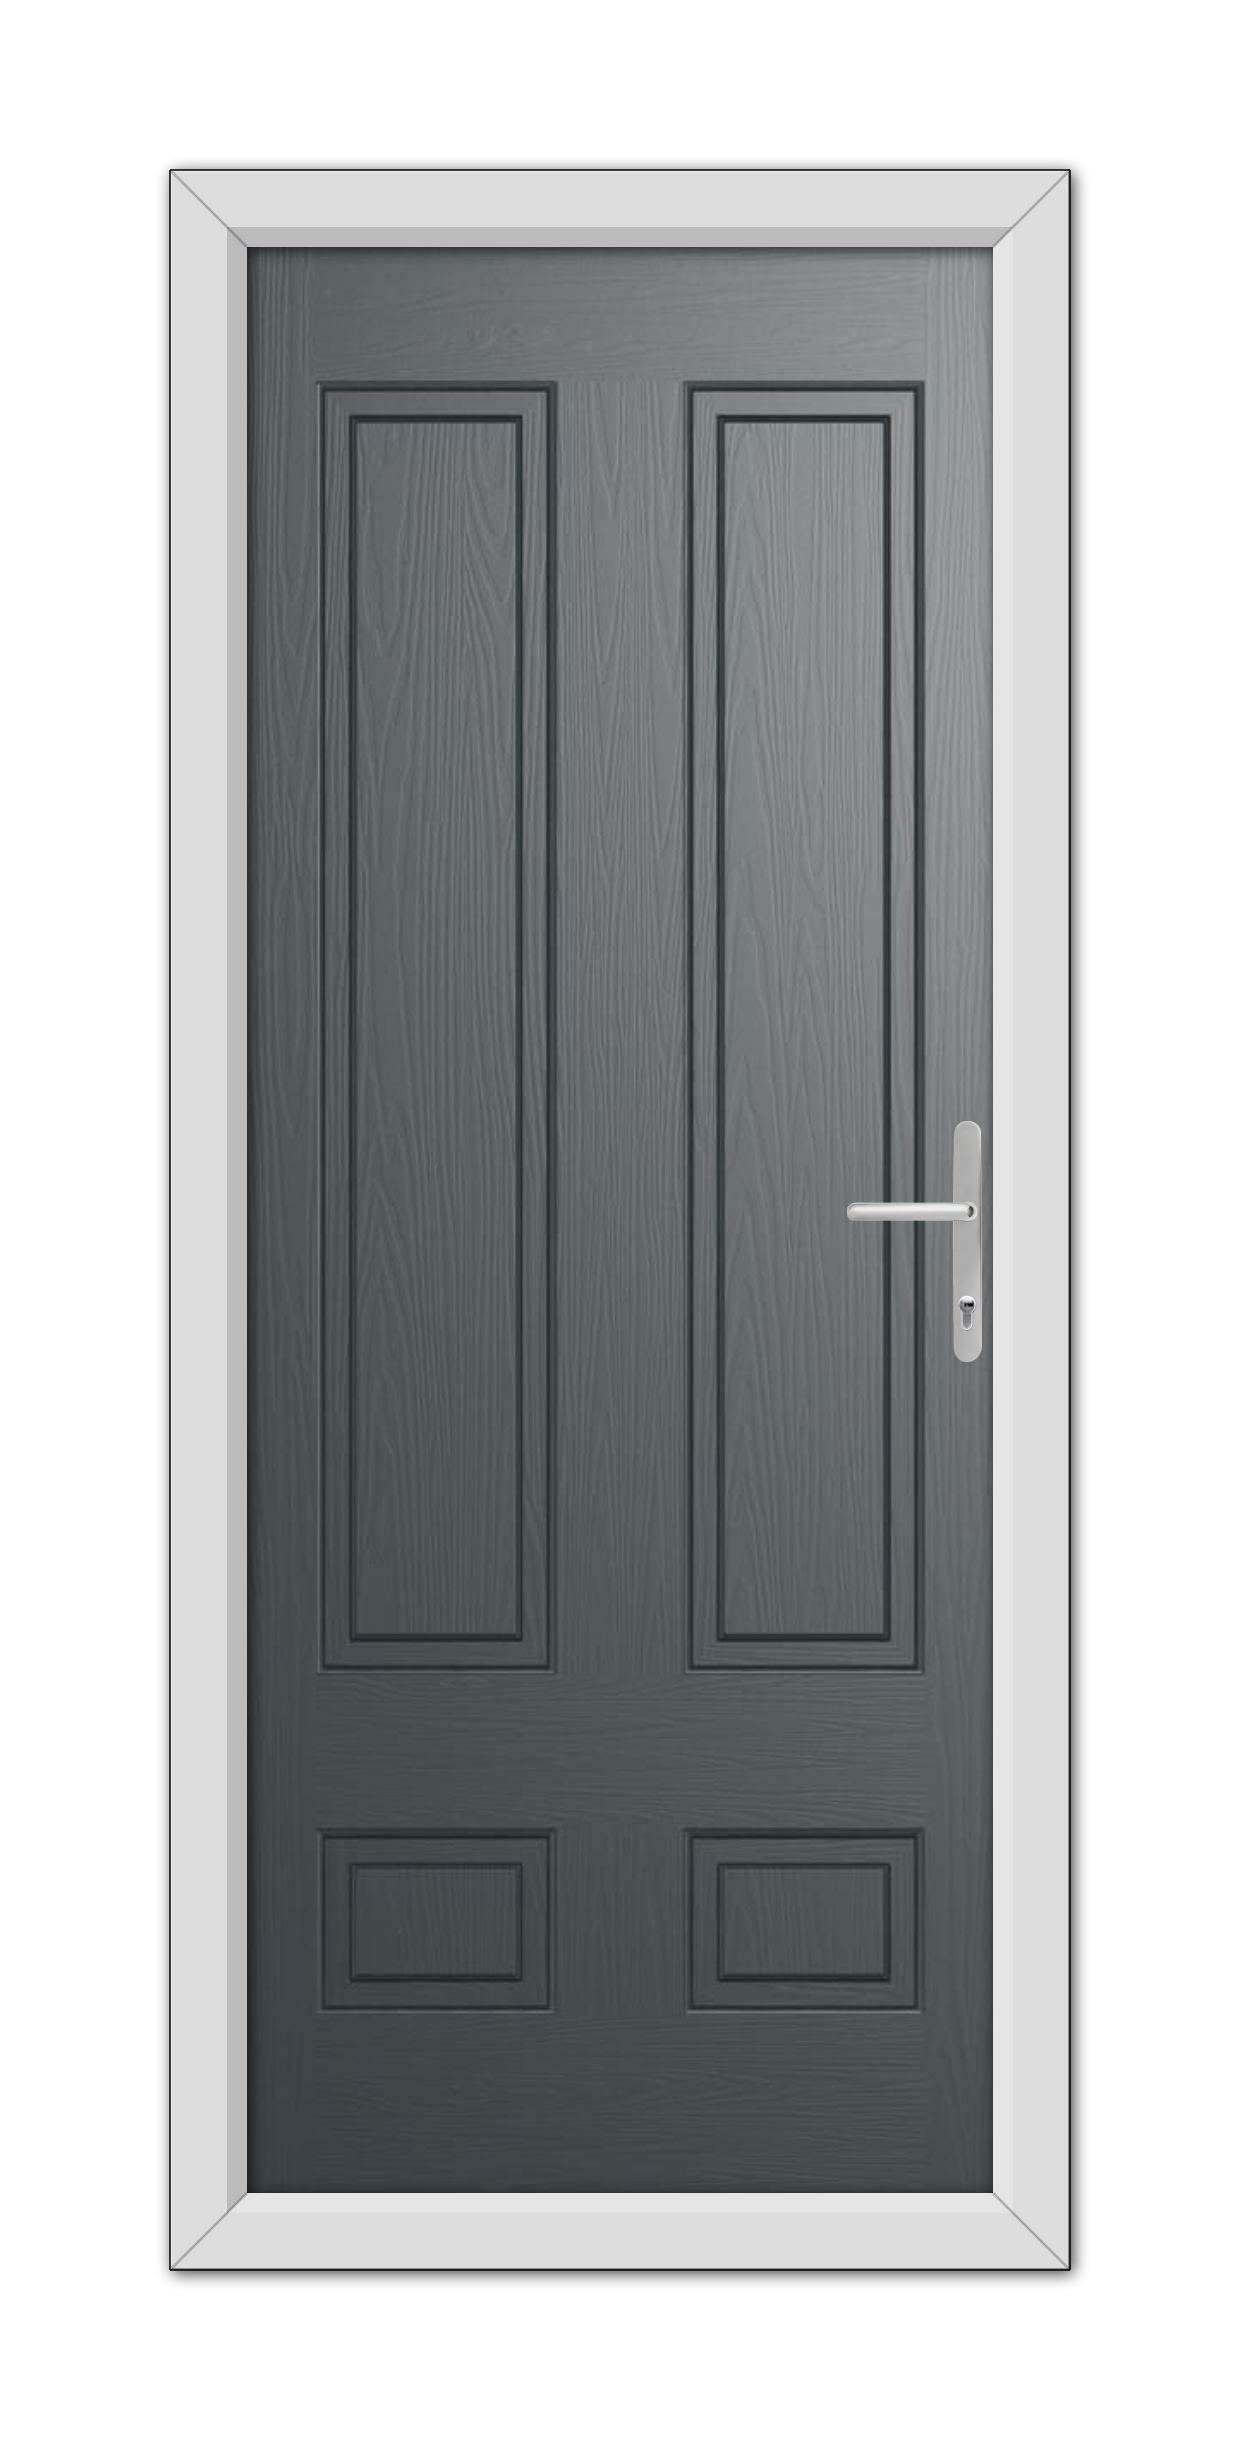 A modern Anthracite Grey double door with a simple handle, set in a white frame, isolated on a white background.